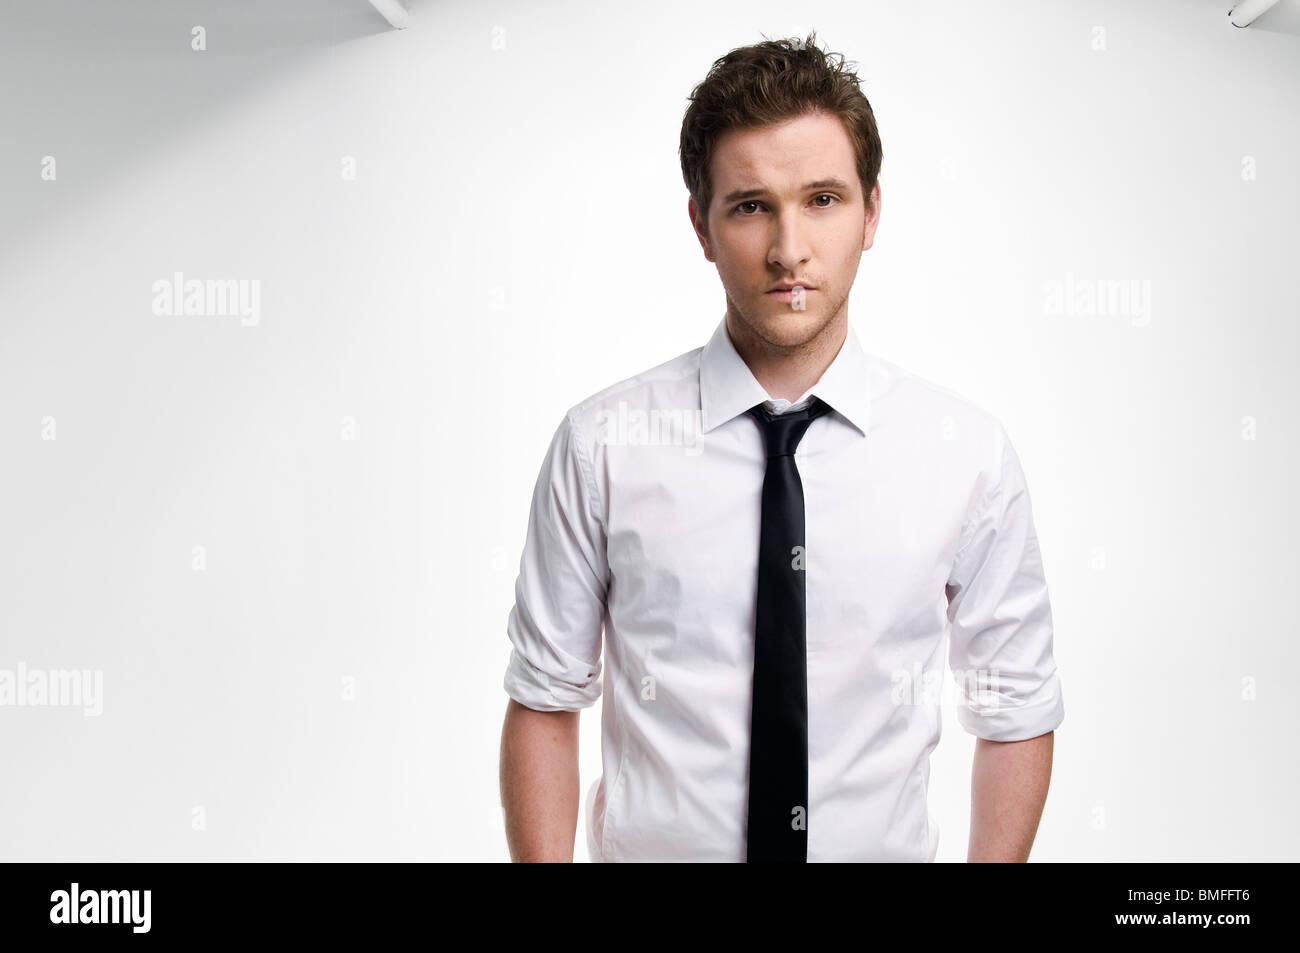 Young man with black tie against white background Stock Photo